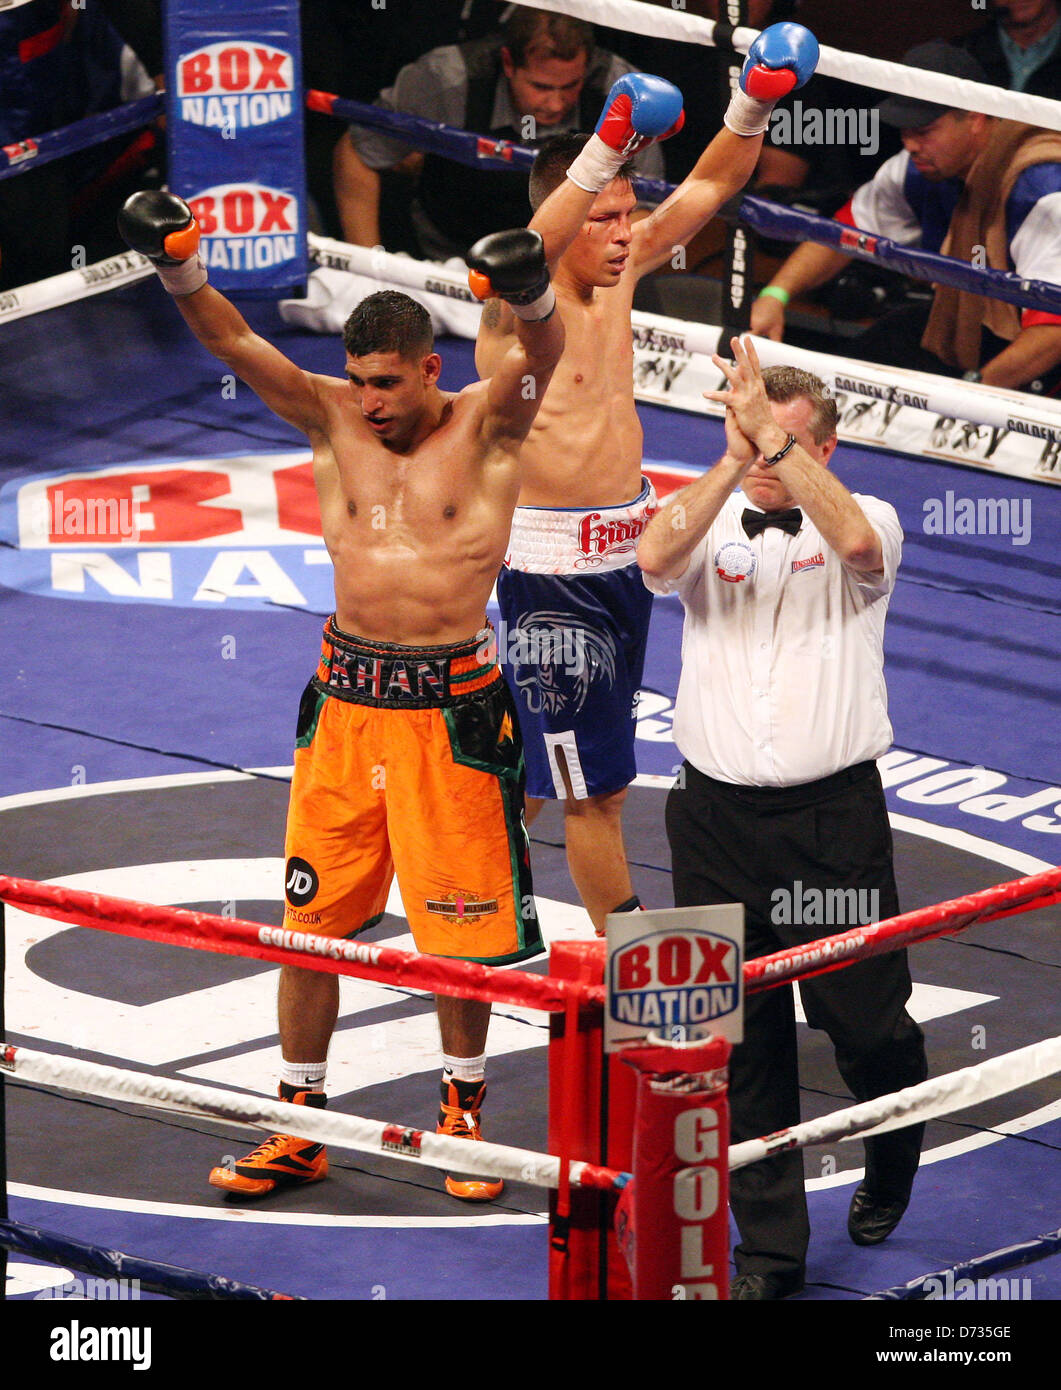 27.04.2013 Sheffield, England. The bell goes at the end of the final round - Amir 'King' Khan against Julio 'the Kidd' Diaz from the Motorpoint Arena. Khan won on a unanimous points decison after a tough fight that saw his put down on the canvas in the 4th round. Stock Photo